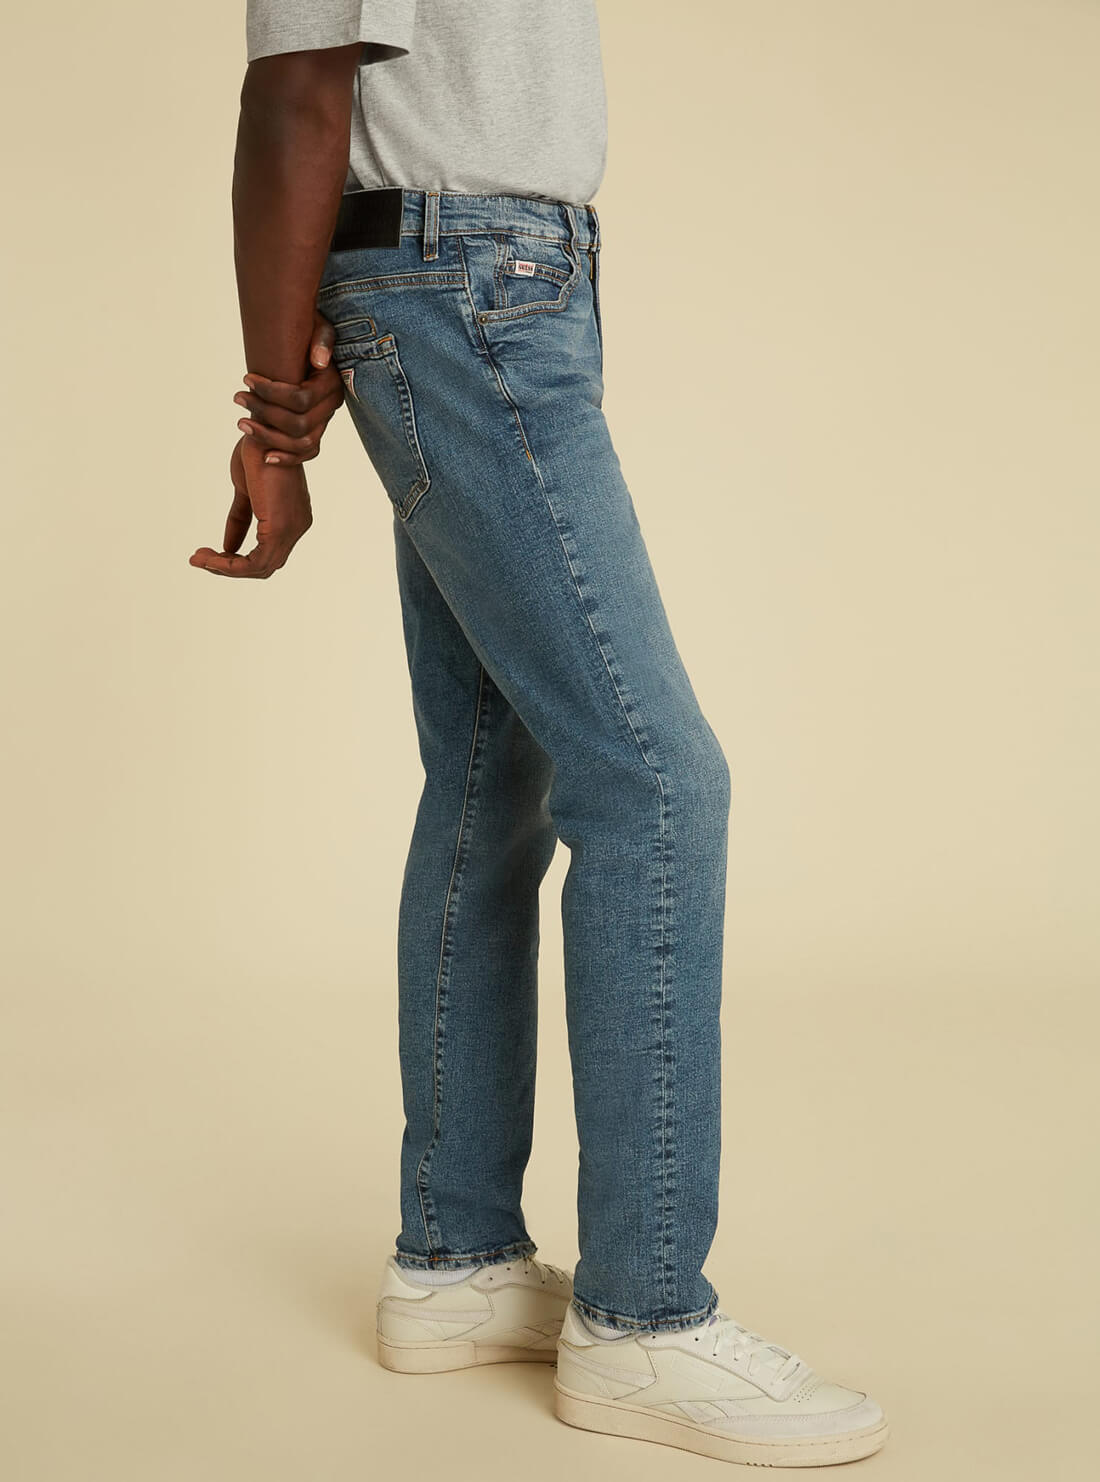 GUESS Mens GUESS Originals Mid-Rise Slim Straight Denim Jeans in Vintage Stone Wash  M1GA05R49T0 Model Side View